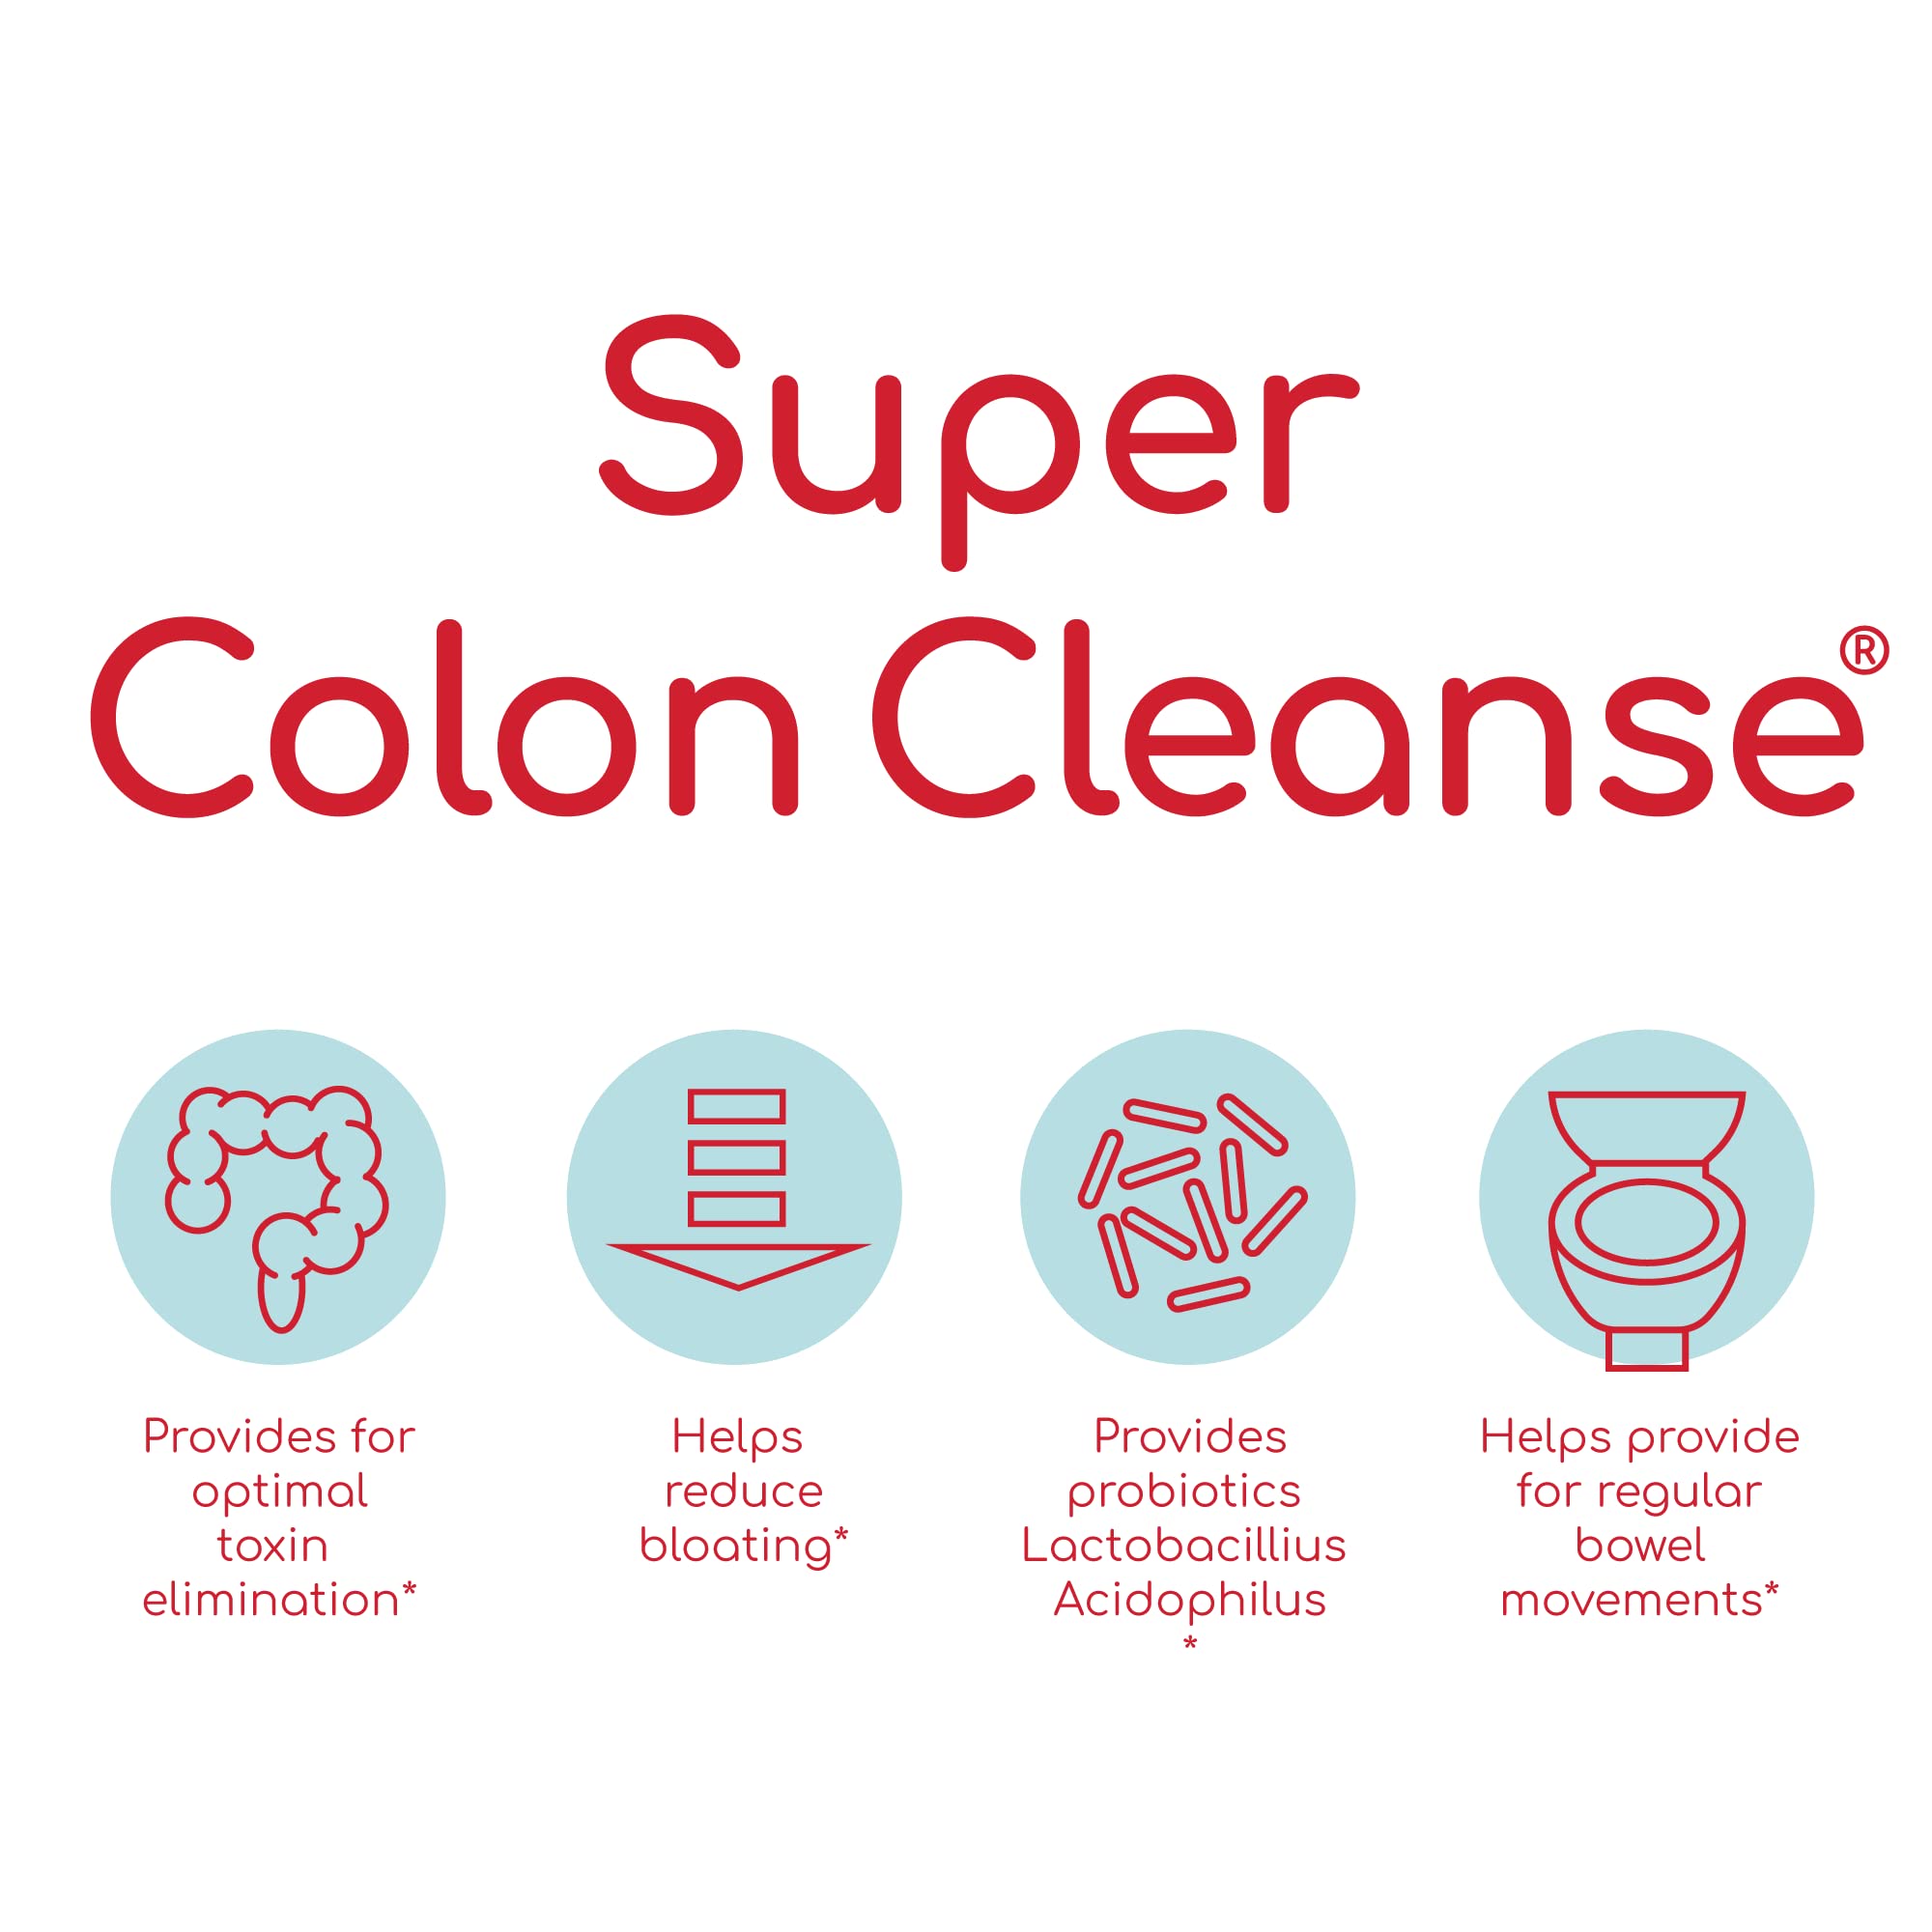 Health Plus Super Colon Cleanse Digestive Support | Constipation Relief to Reduce Bloating with Probiotics, Senna Leaf, & Psyllium Husk | More than 1 Cleanse, 60 Capsules